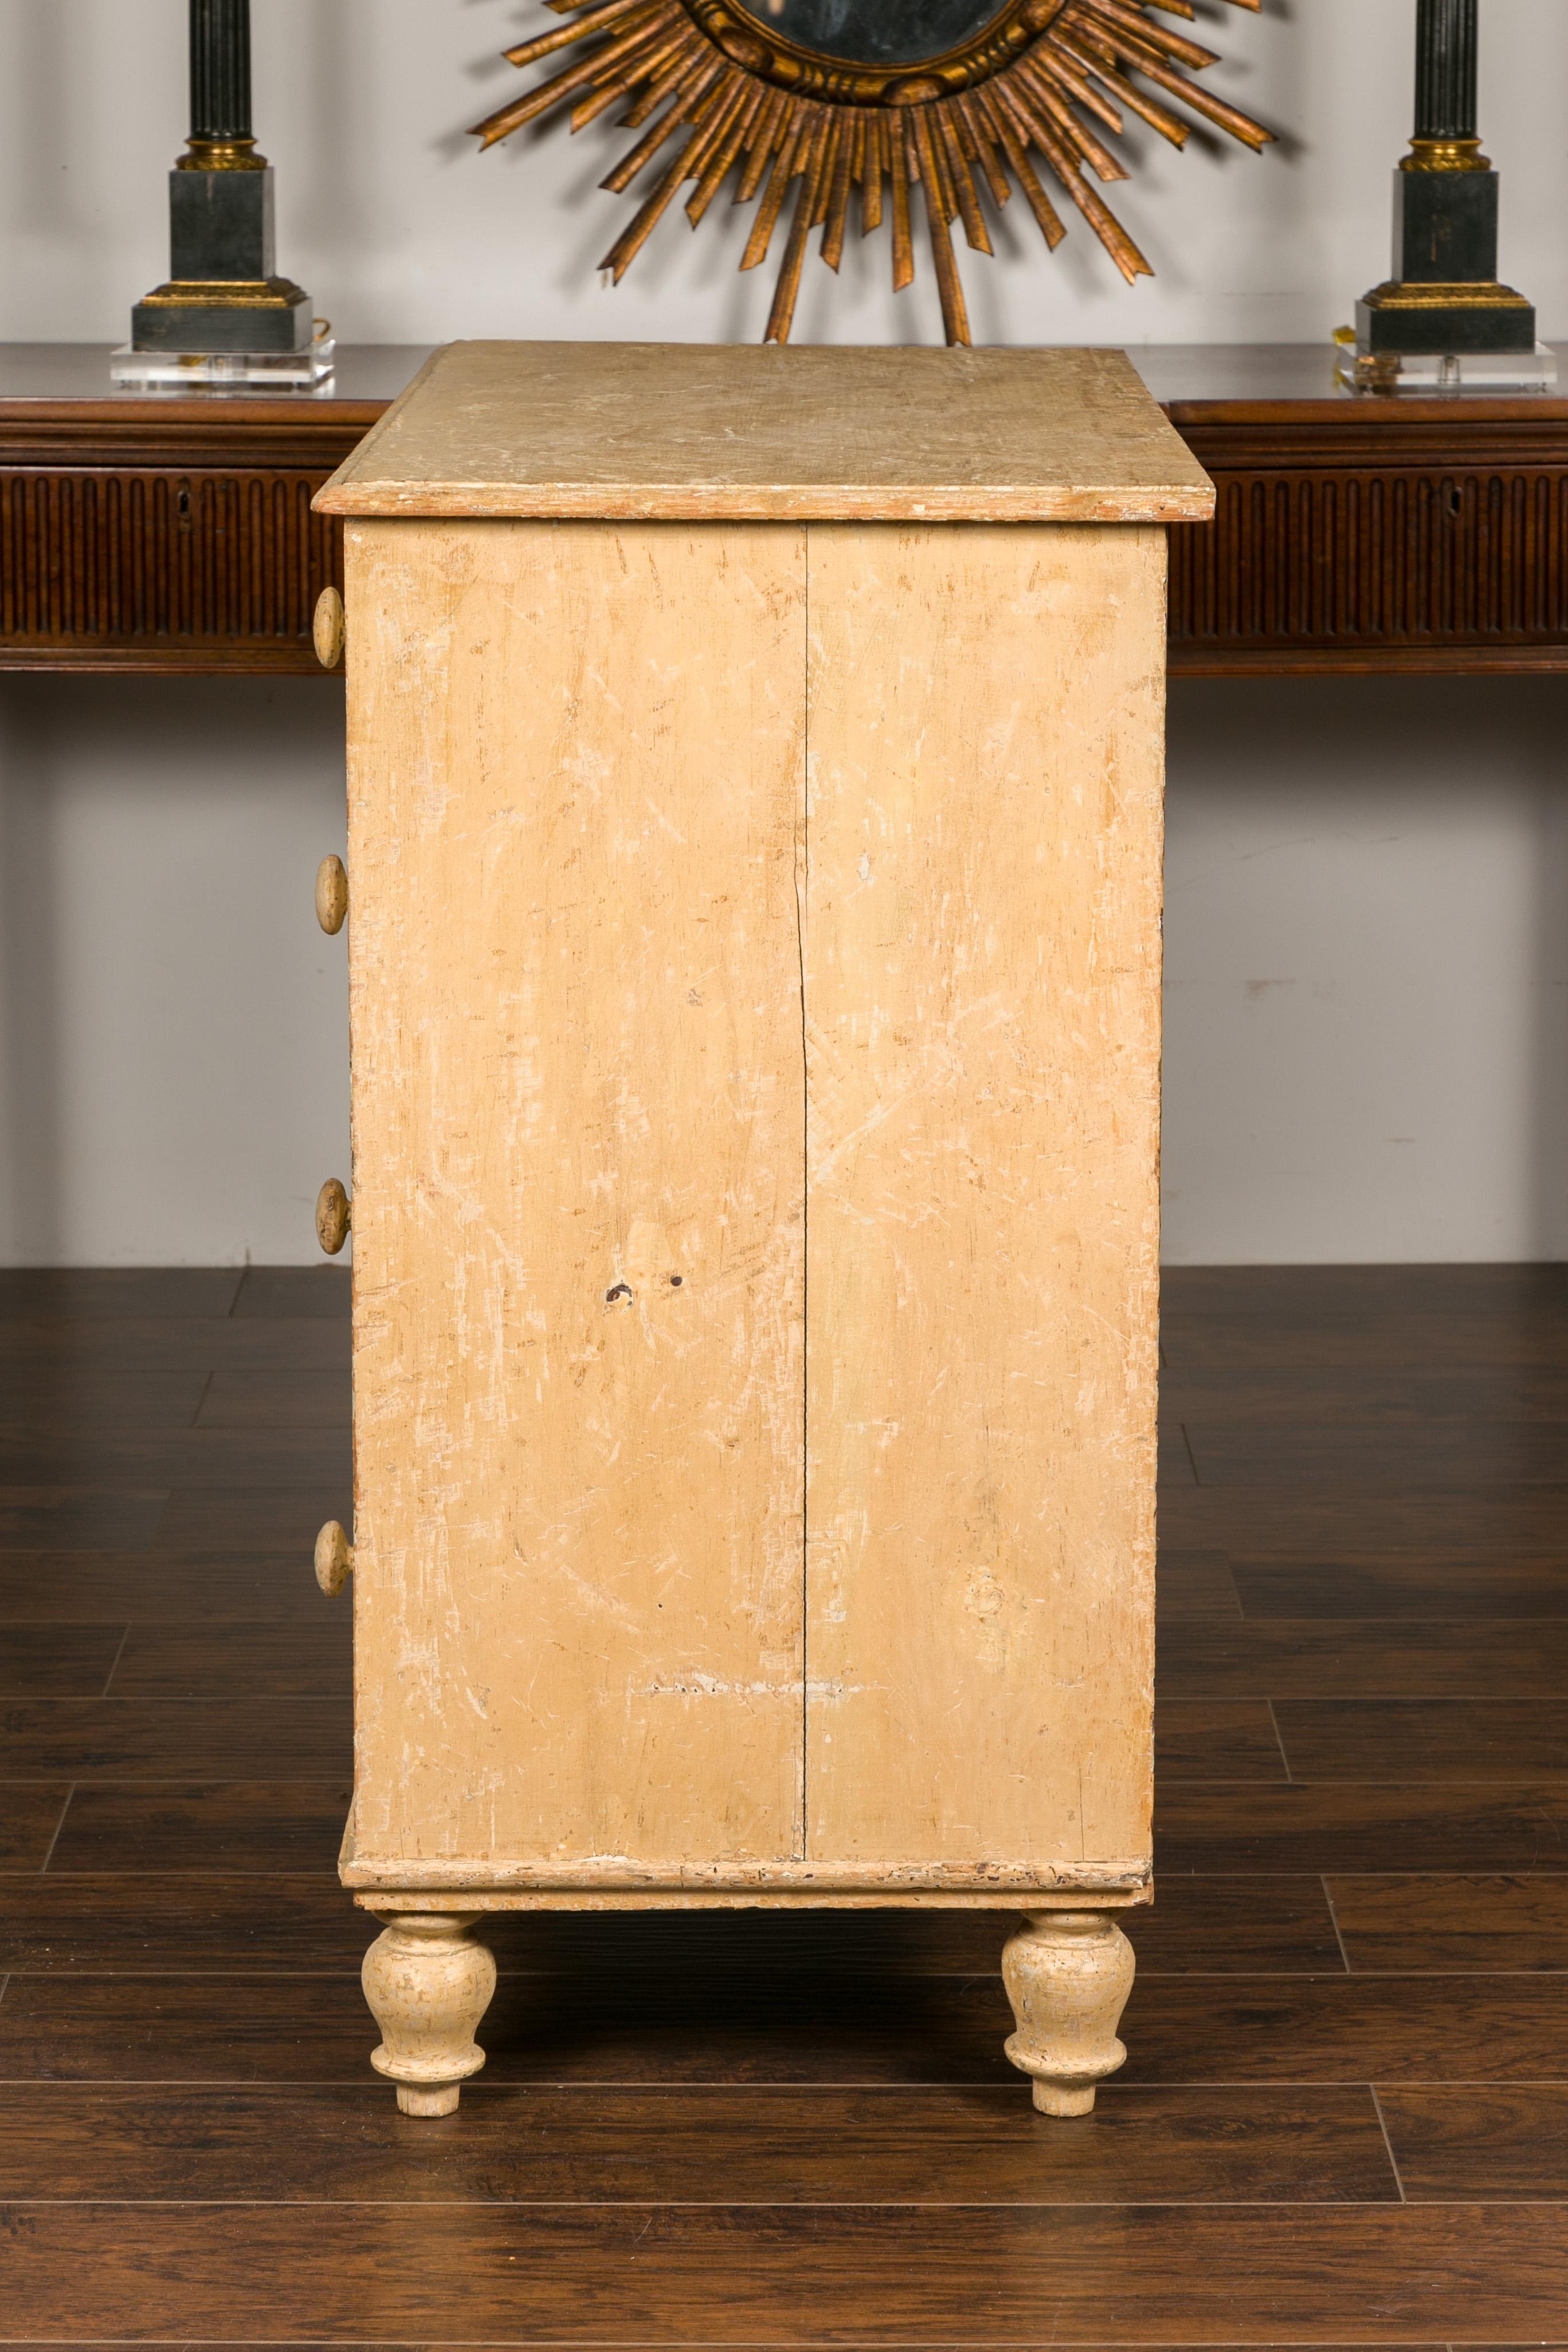 English 1860s Painted Wood Five-Drawer Chest with Turnip Feet and Wooden Pulls For Sale 10